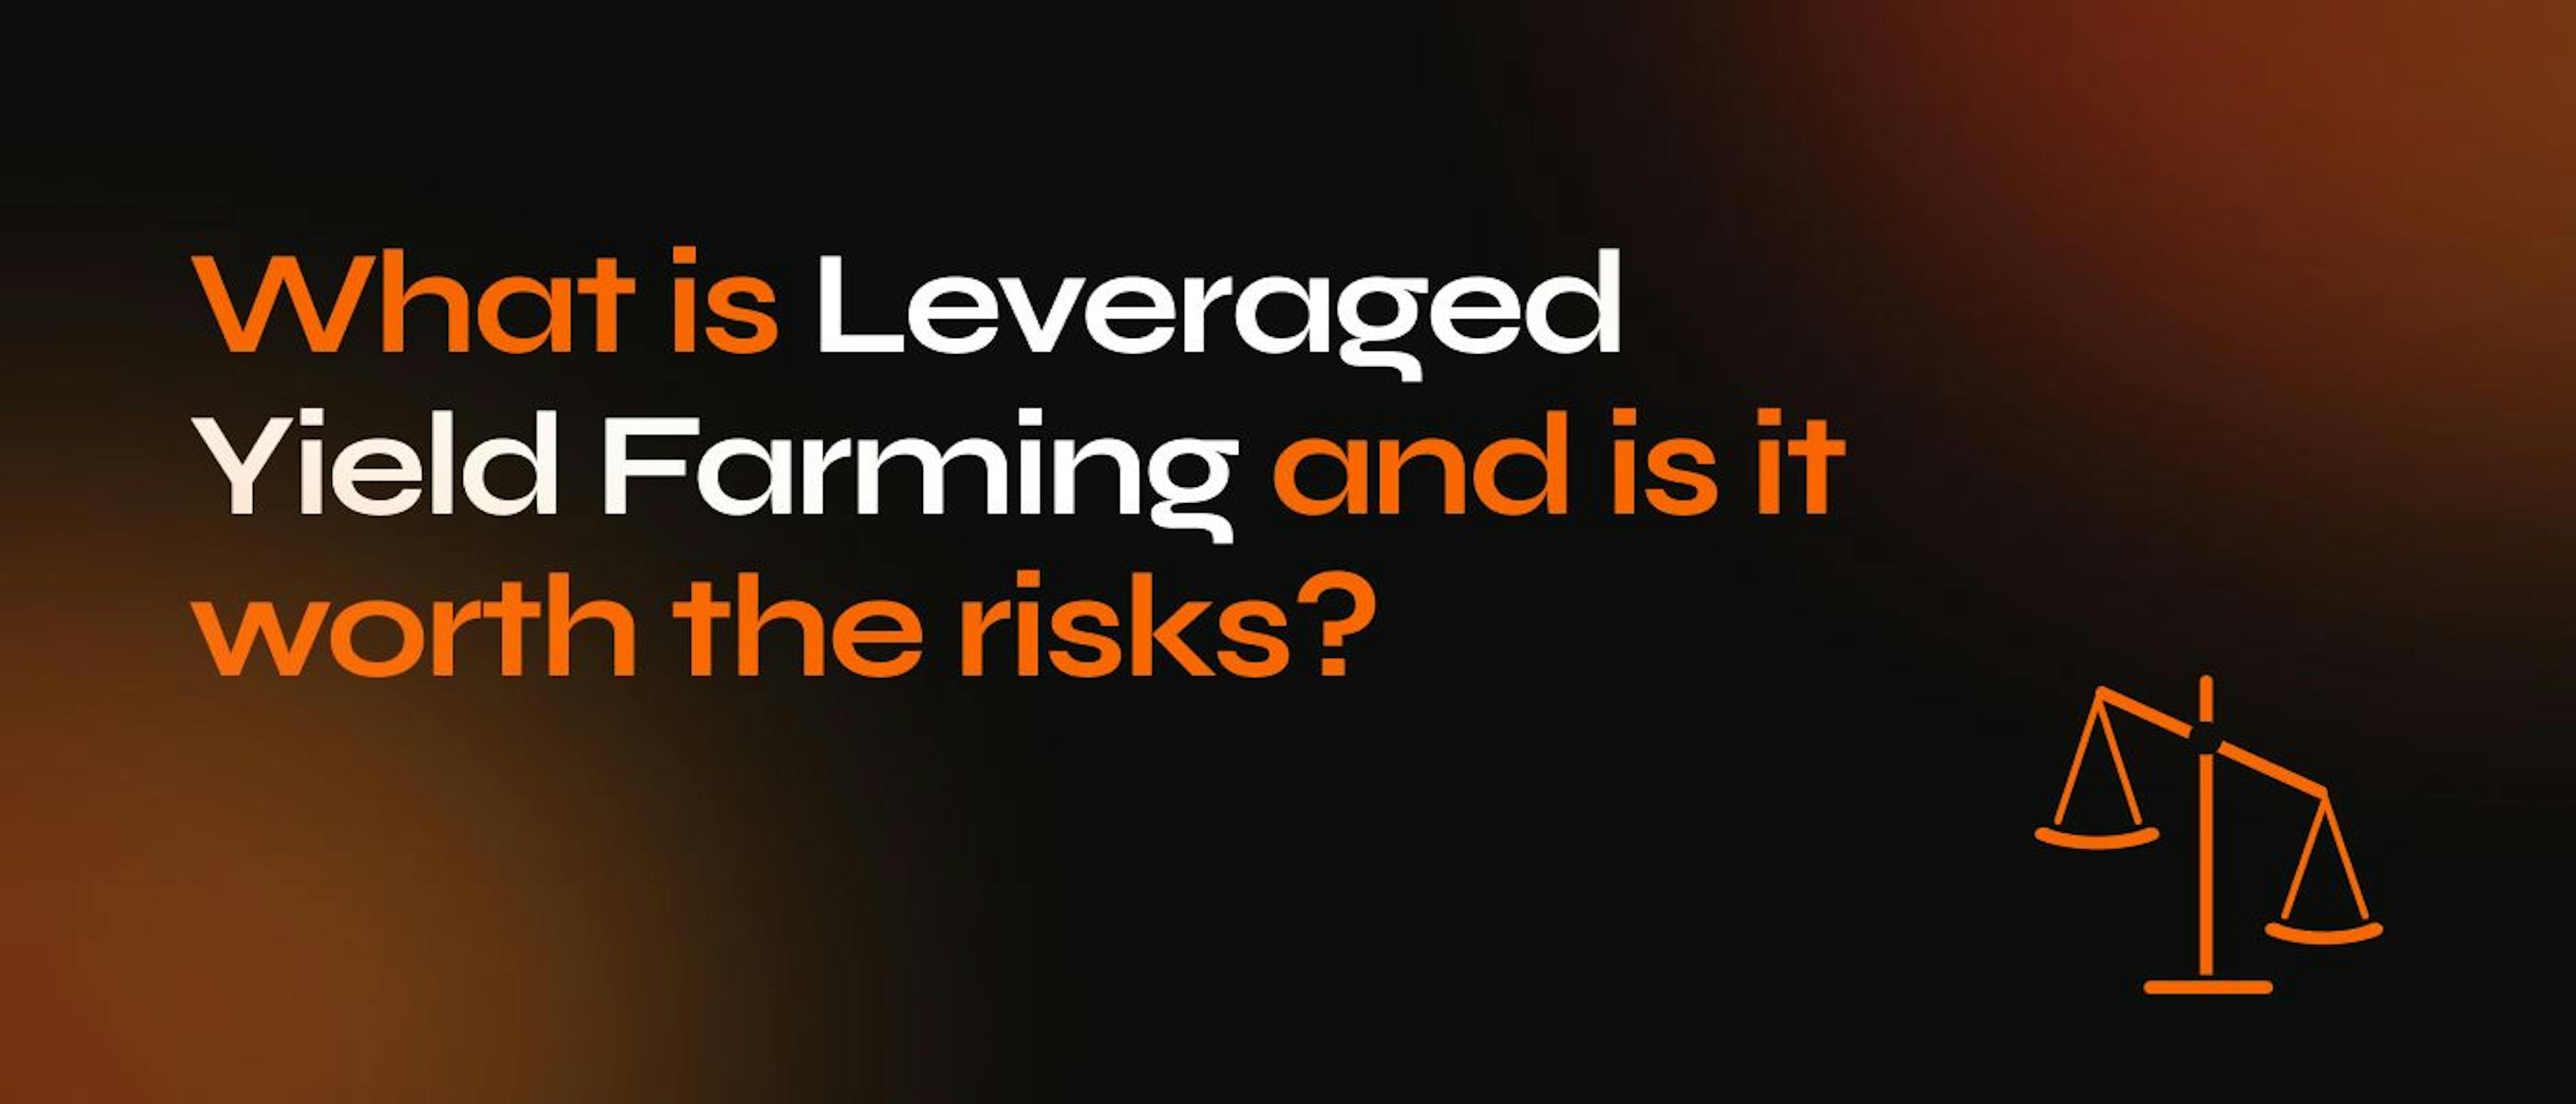 featured image - What Is Leveraged Yield Farming and Is It Worth the Risks?